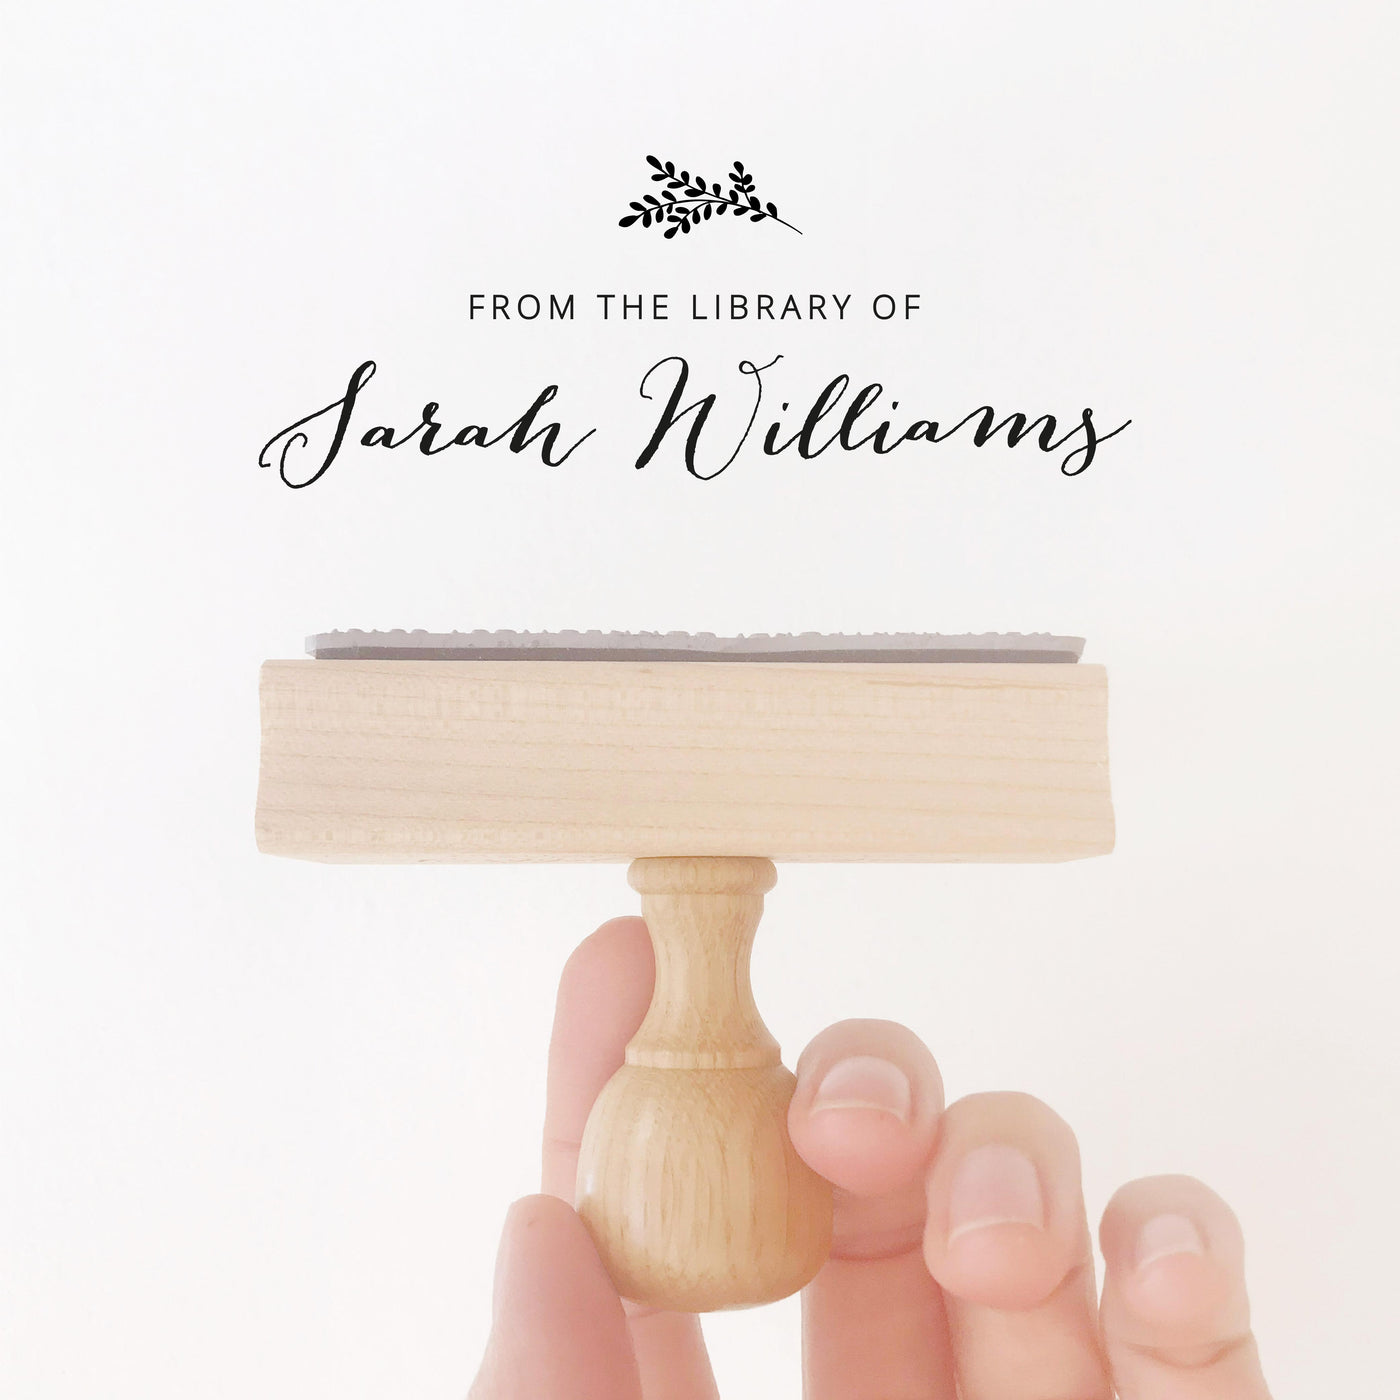 Sophia Calligraphy Botanical Engraved Library Book Stamp | Custom Ex Libre Rubber Stamp with Wooden Handle for Wedding Couple & Family Gift, Luxe Packaging Embellishment | Heirloom Seals